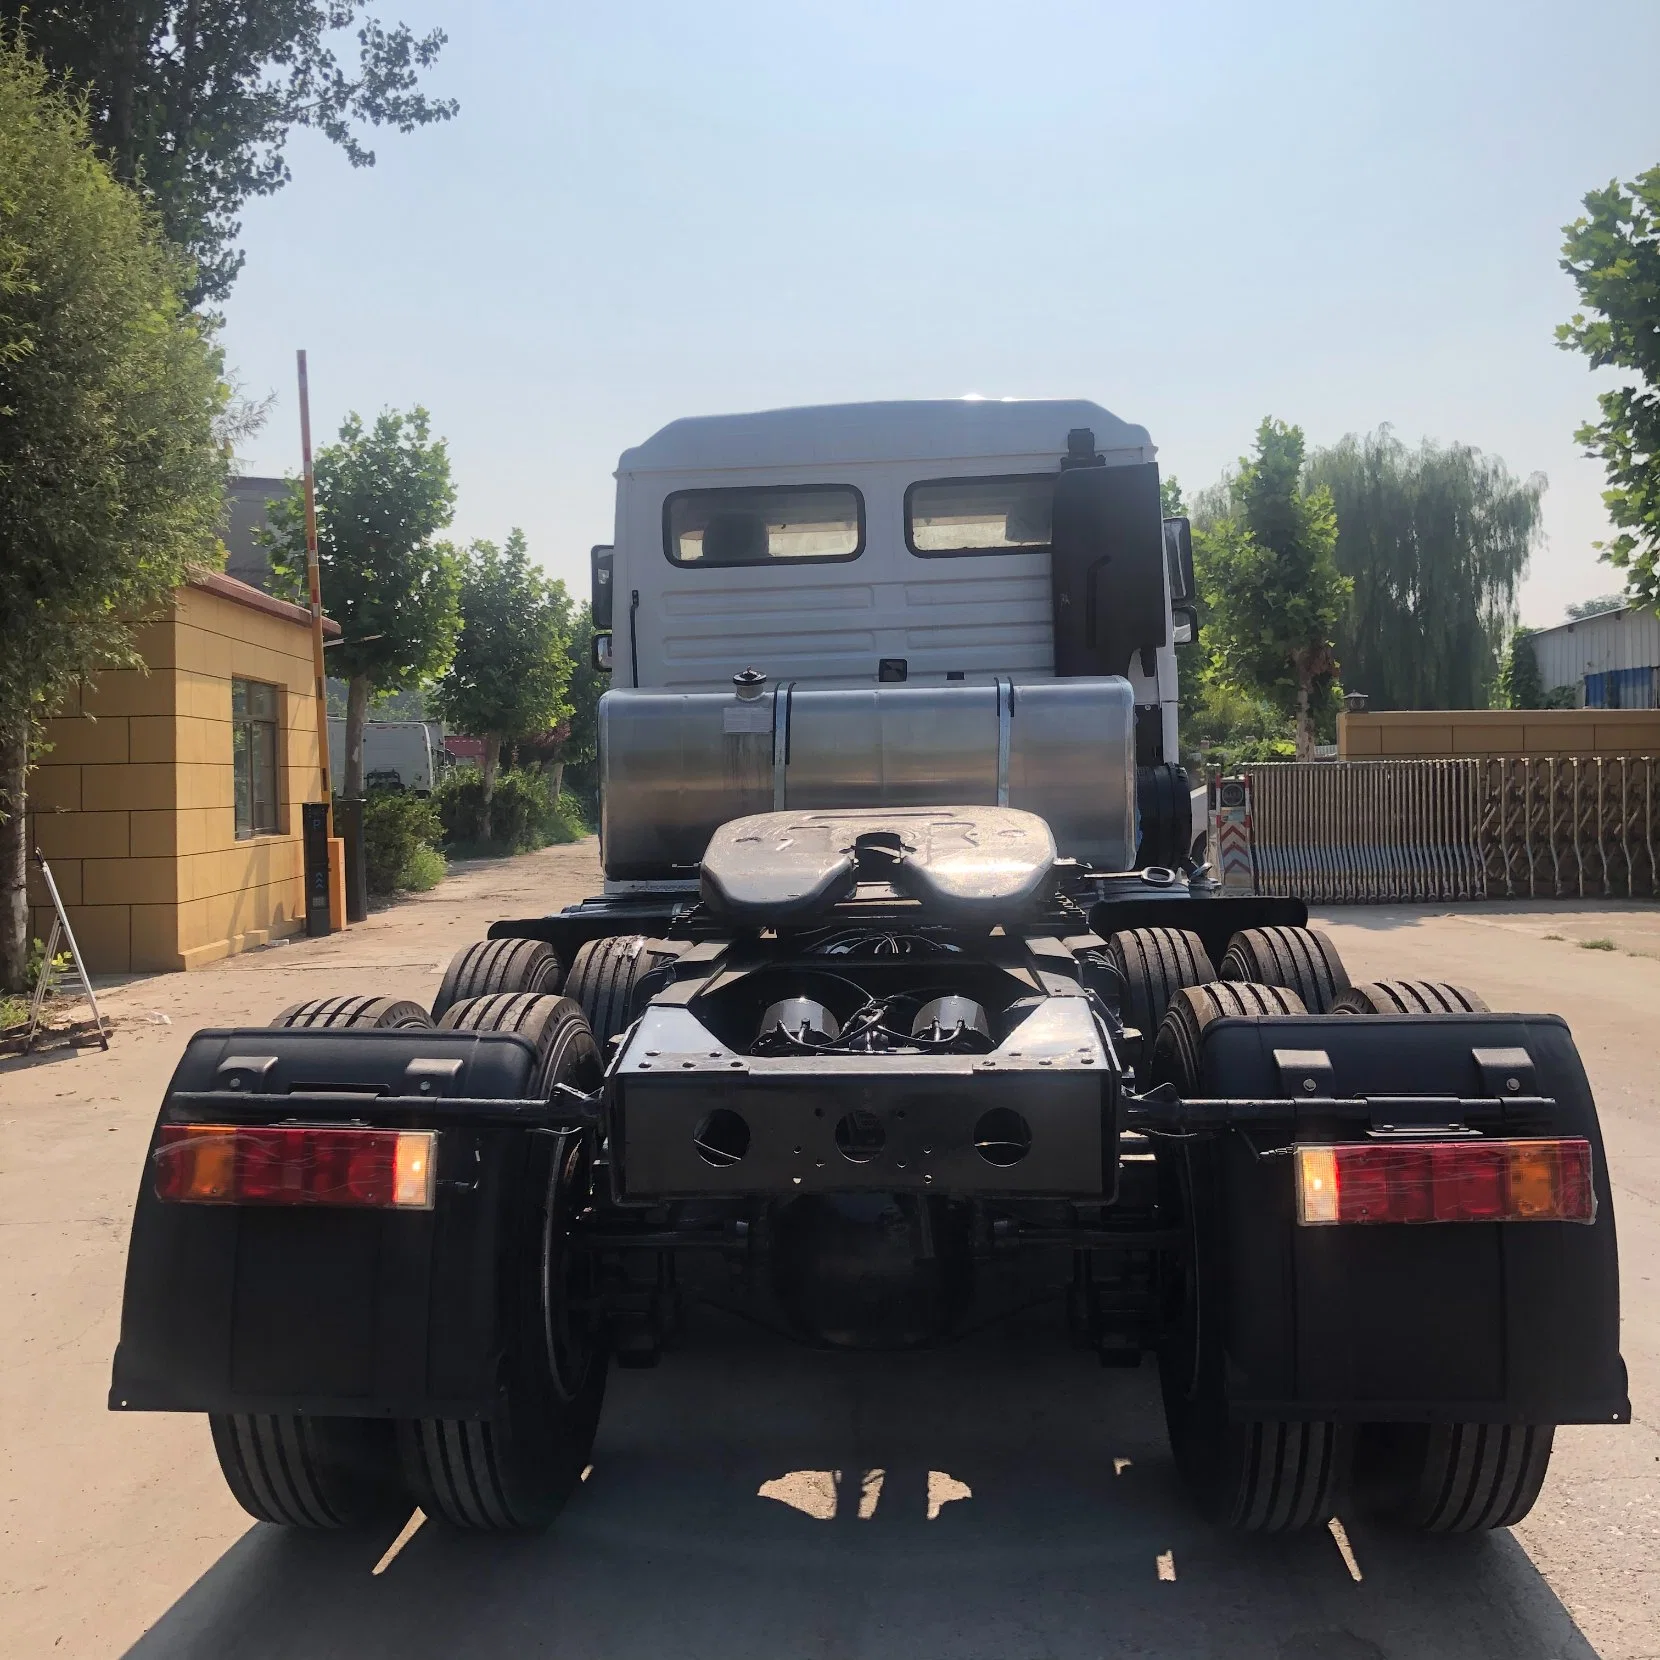 Used Shacman Tractor Truck 430HP 6X4 Used Truck Head Euro 4 Weichai Engine 6*4 Chinese Tractors Trucks for Sale